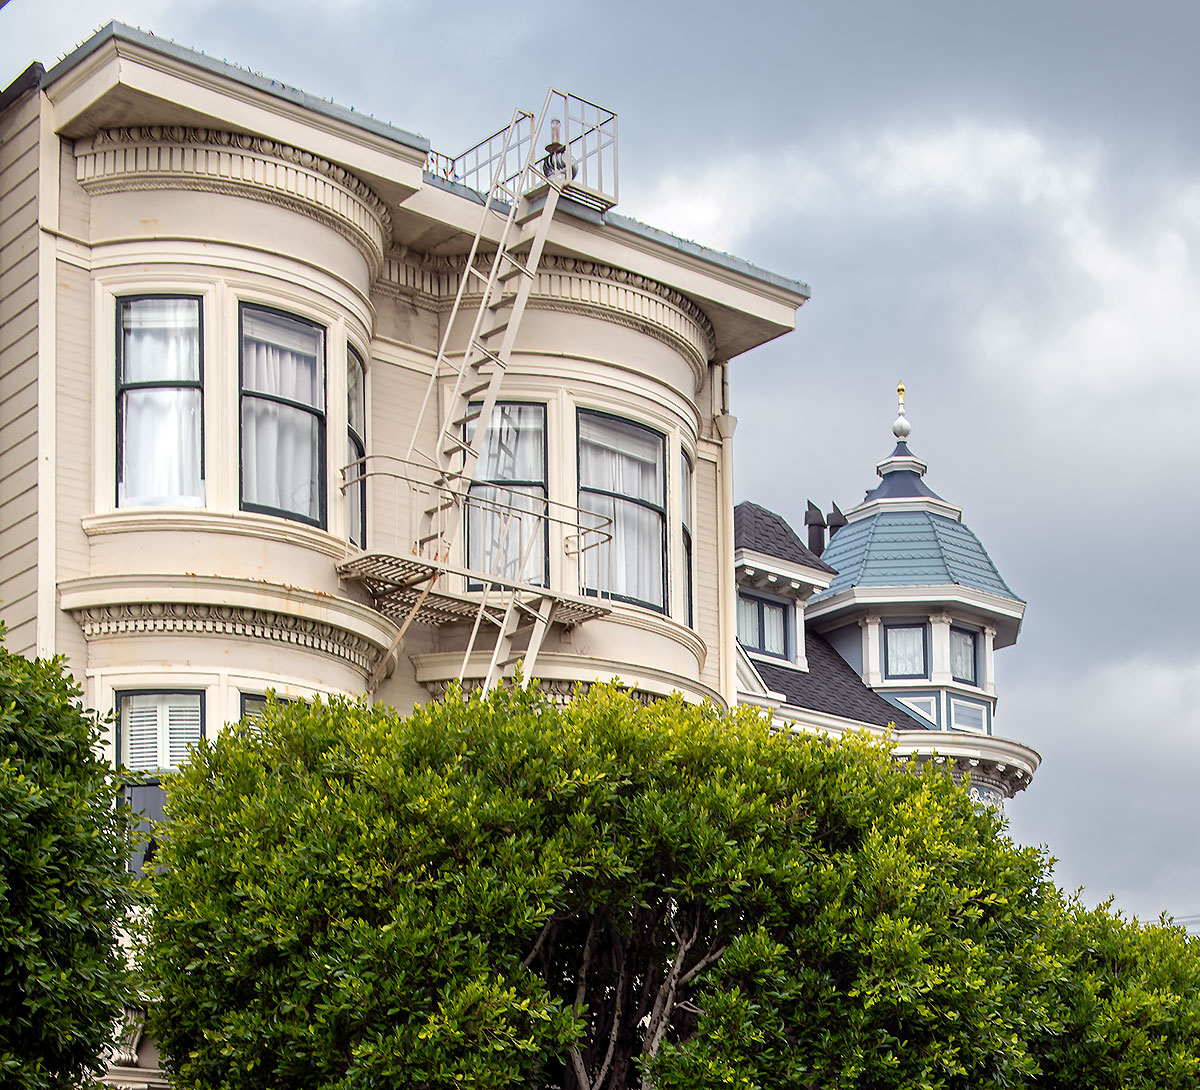 3169 Clay Street in Pacific Heights, designed by Edward E. Young, built 1921